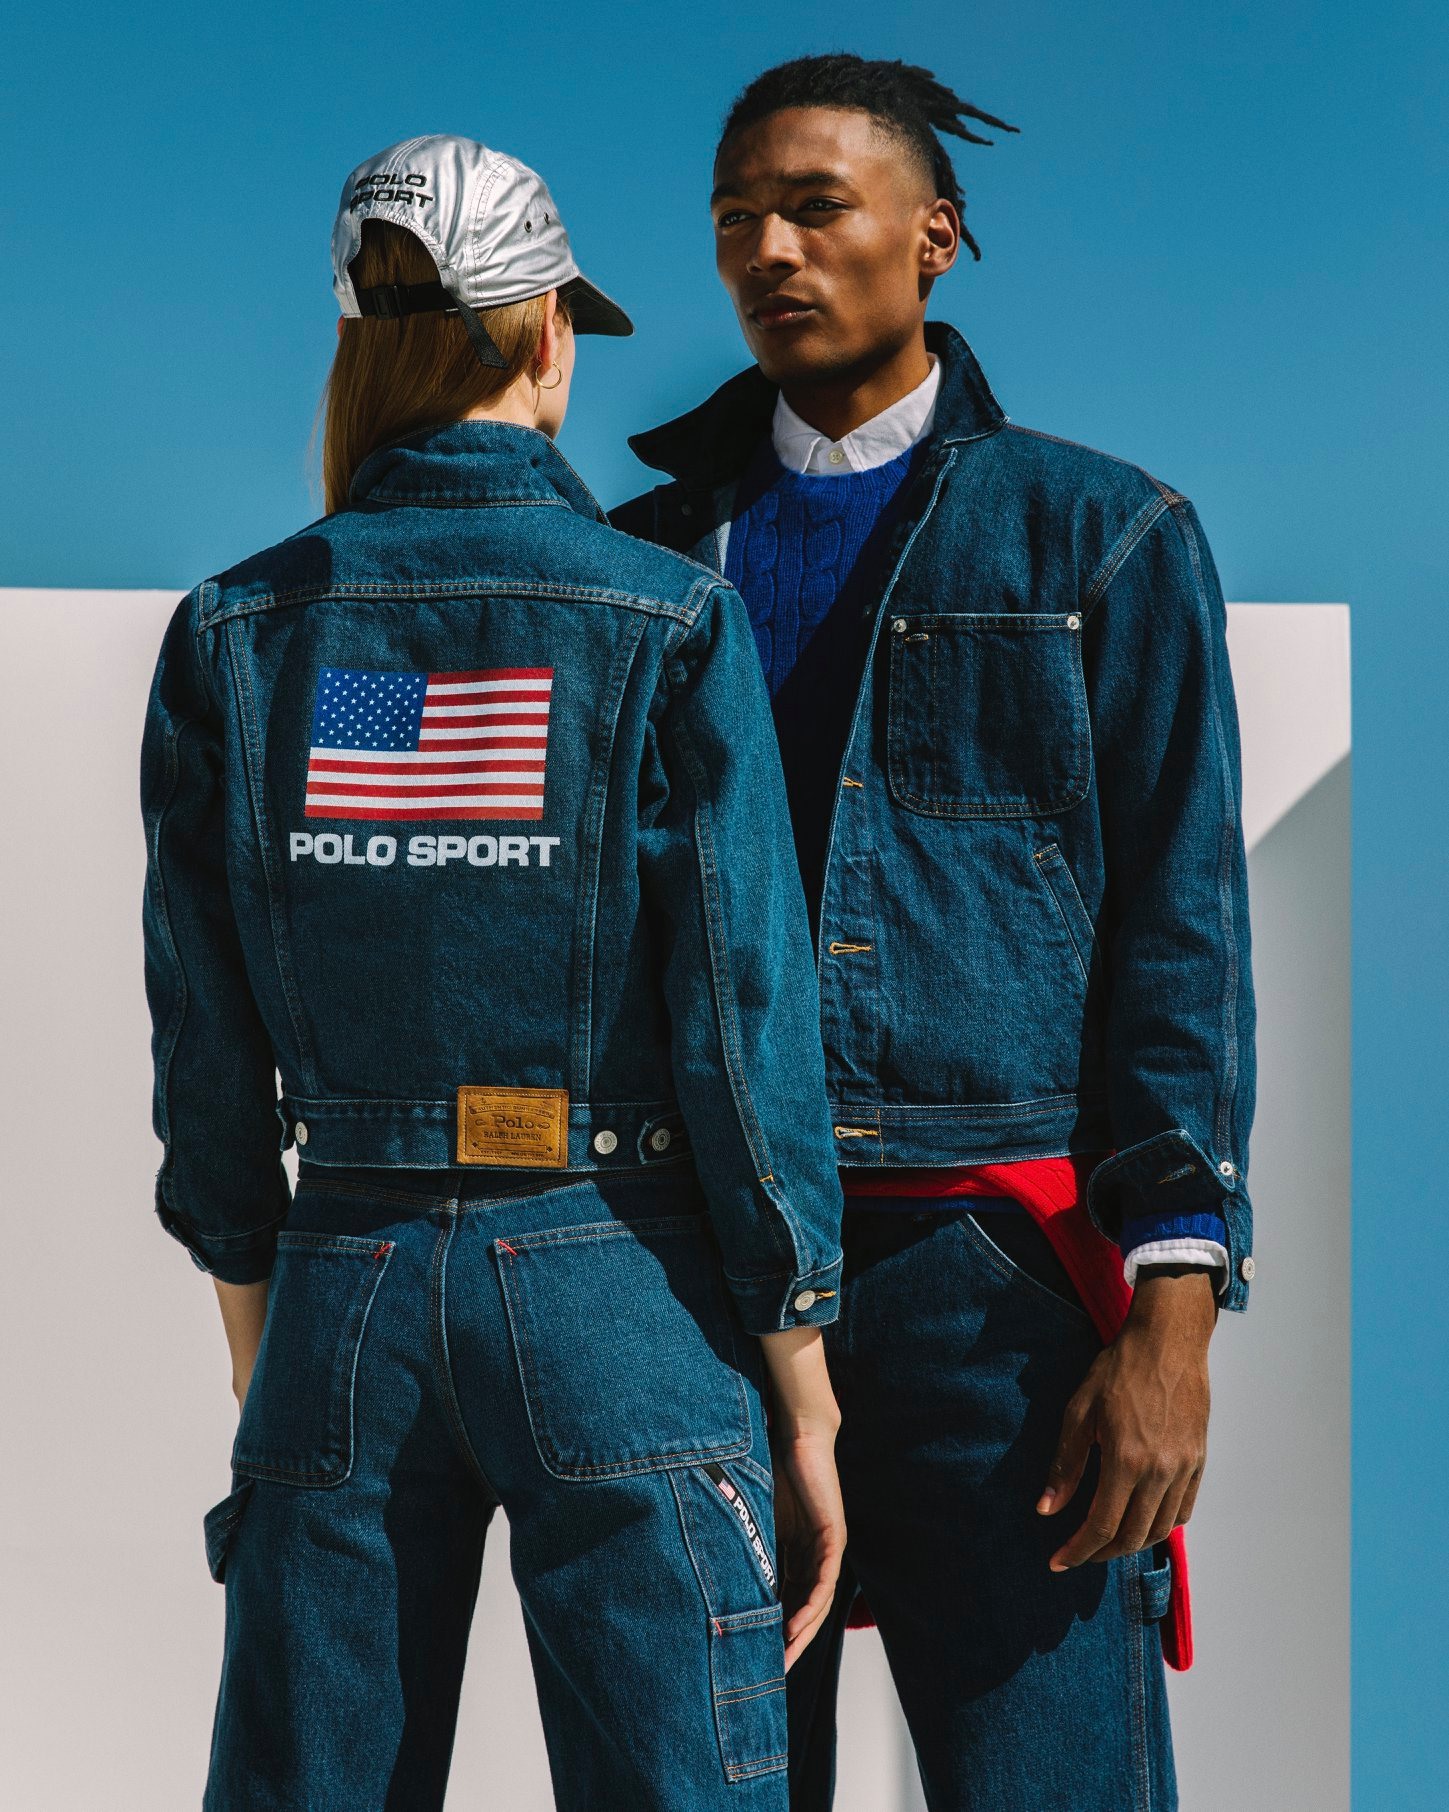 The #PoloSport Denim Collection, available May 31 in select stores: